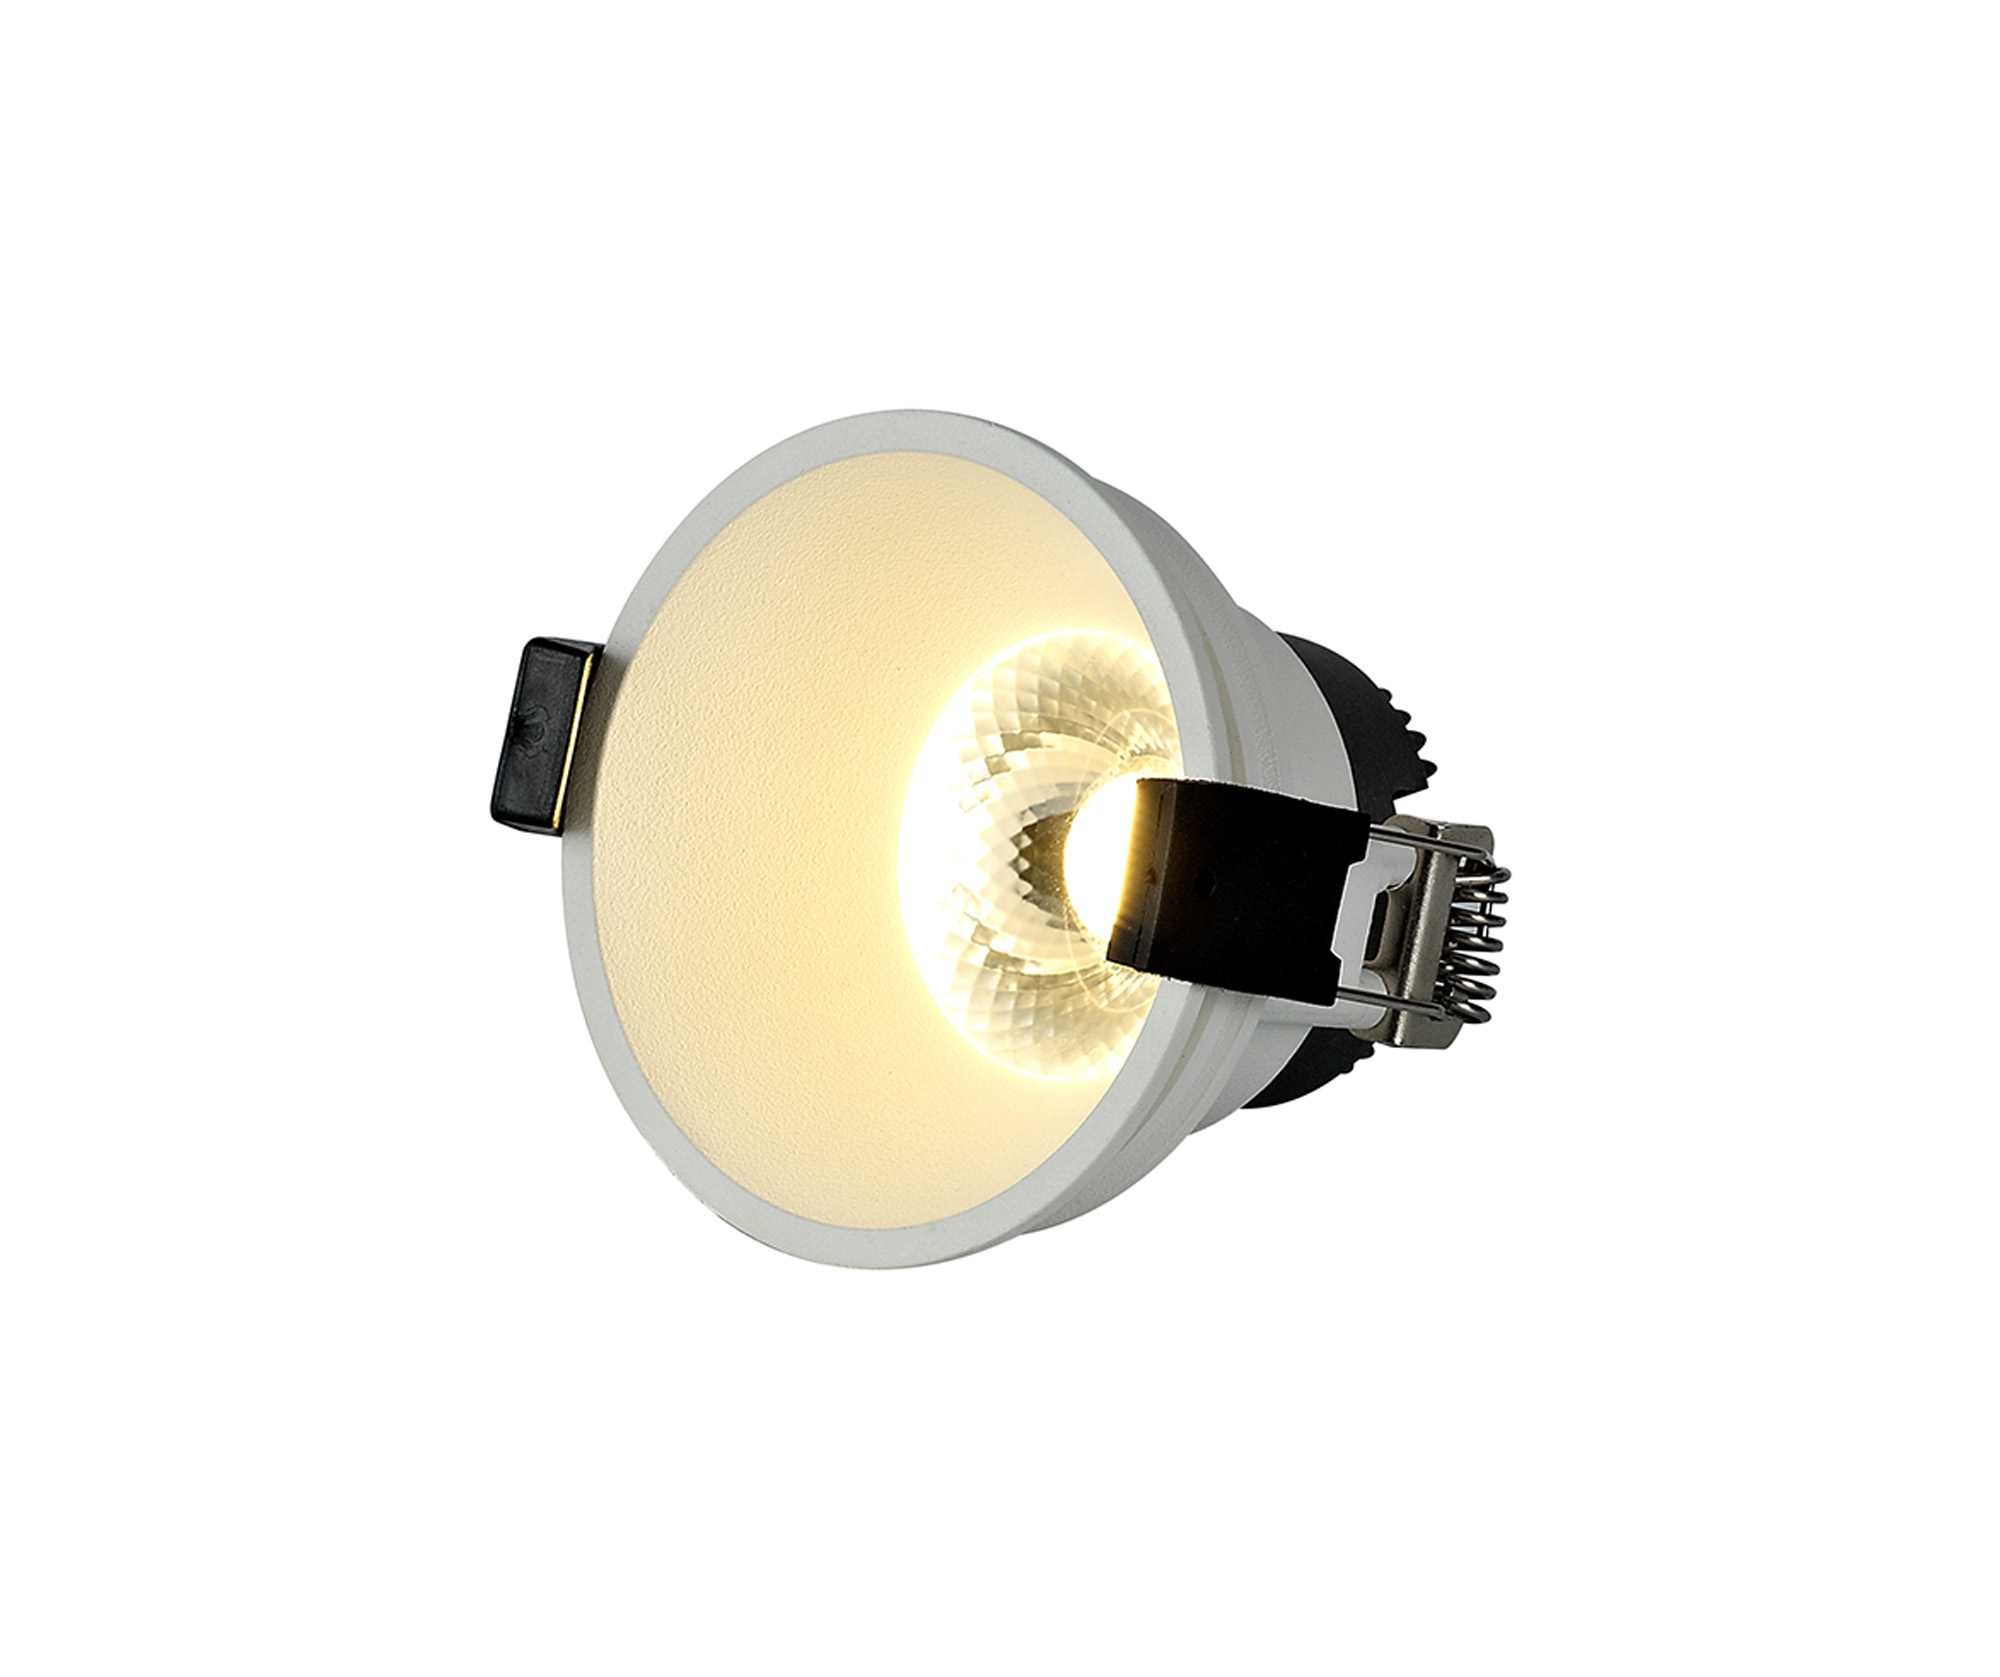 DM201617  Bania 8S 8W ;180mA 480lm 4000K 60° LED Engine; White IP65 Fixed Recessed Spotlight Inner Glass cover; 5yrs Warranty